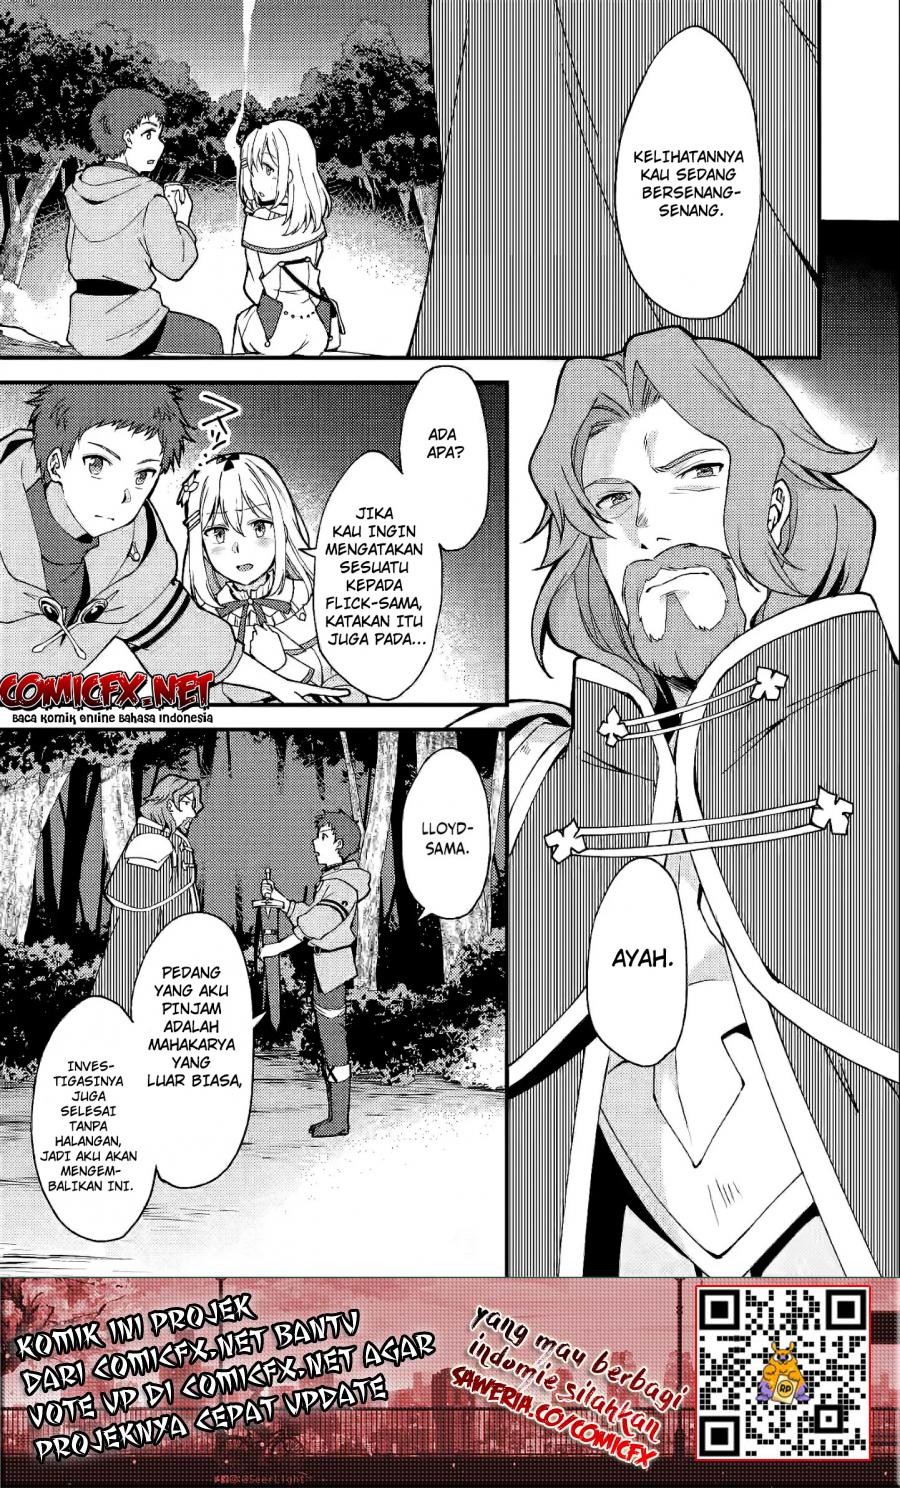 A Sword Master Childhood Friend Power Harassed Me Harshly, So I Broke off Our Relationship and Make a Fresh Start at the Frontier as a Magic Swordsman Chapter 7.2